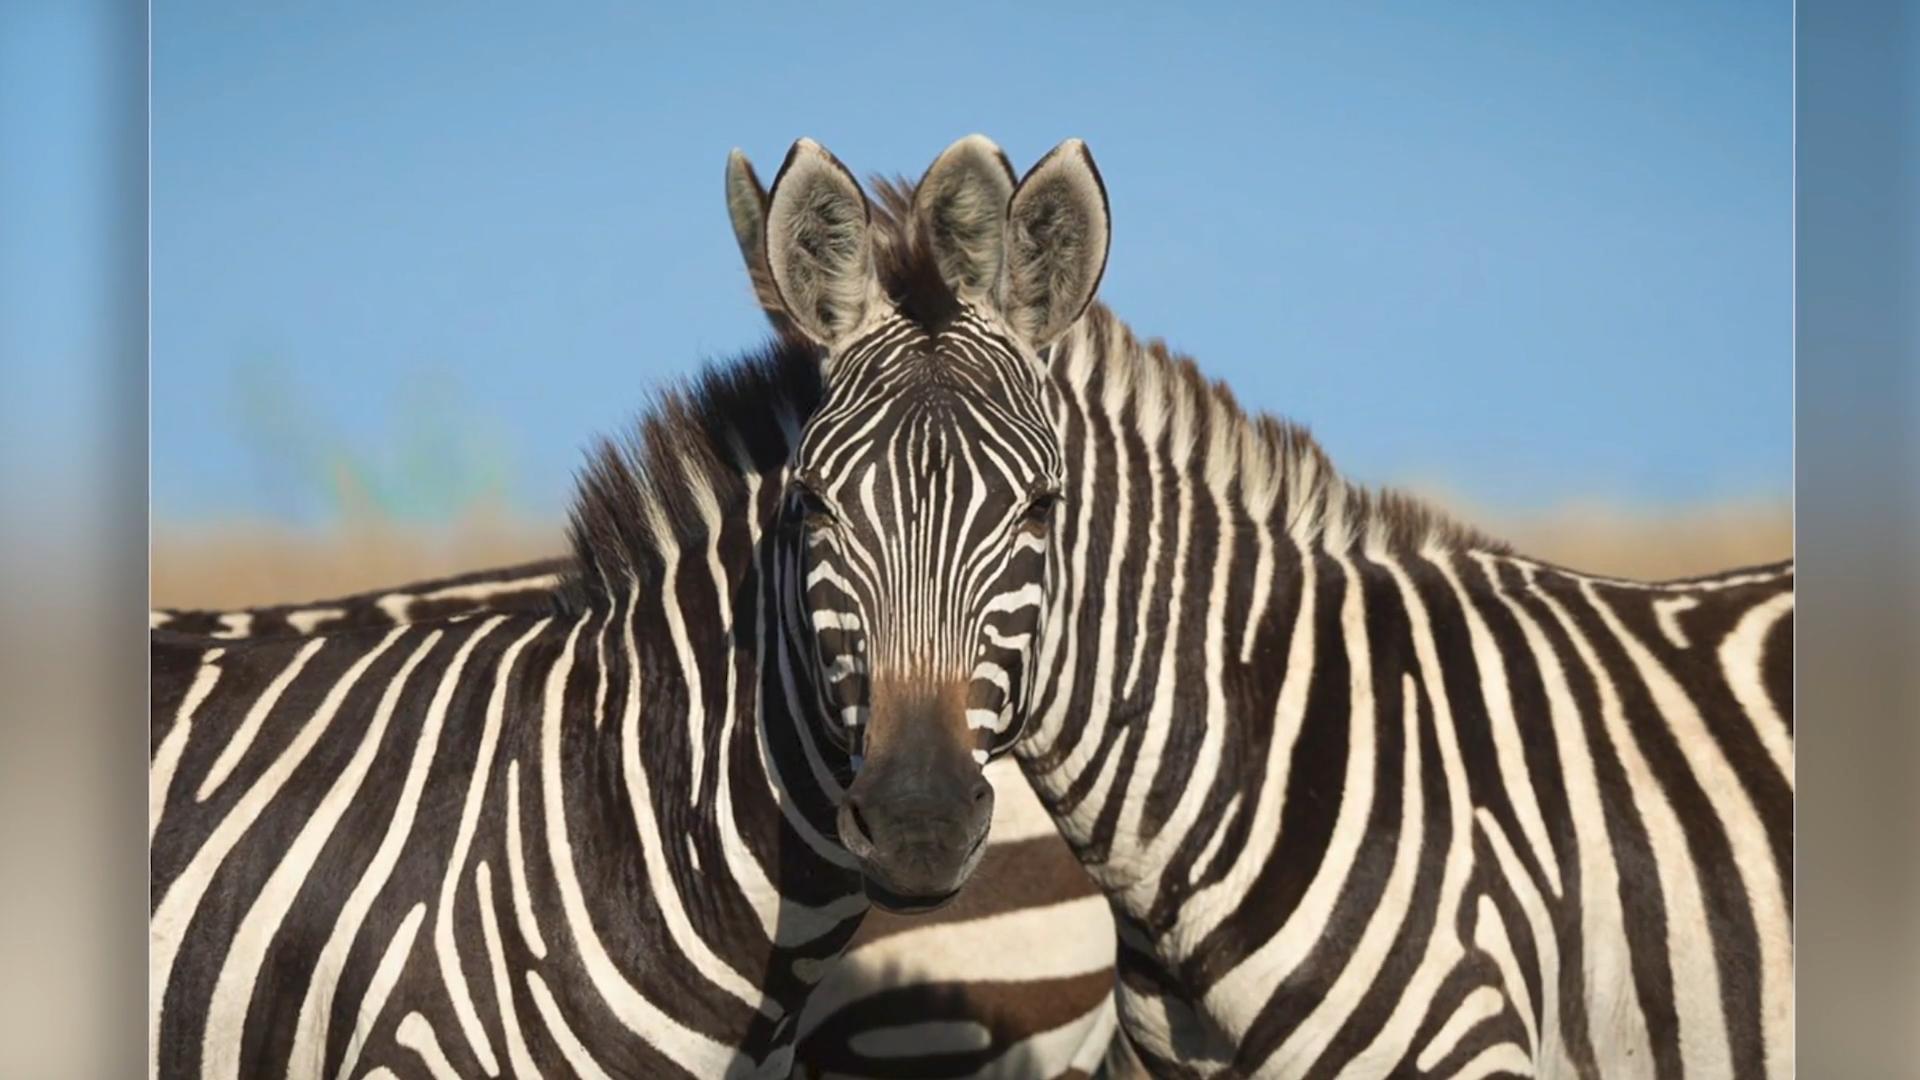 Which zebra is in front - left or right?  Optical illusions